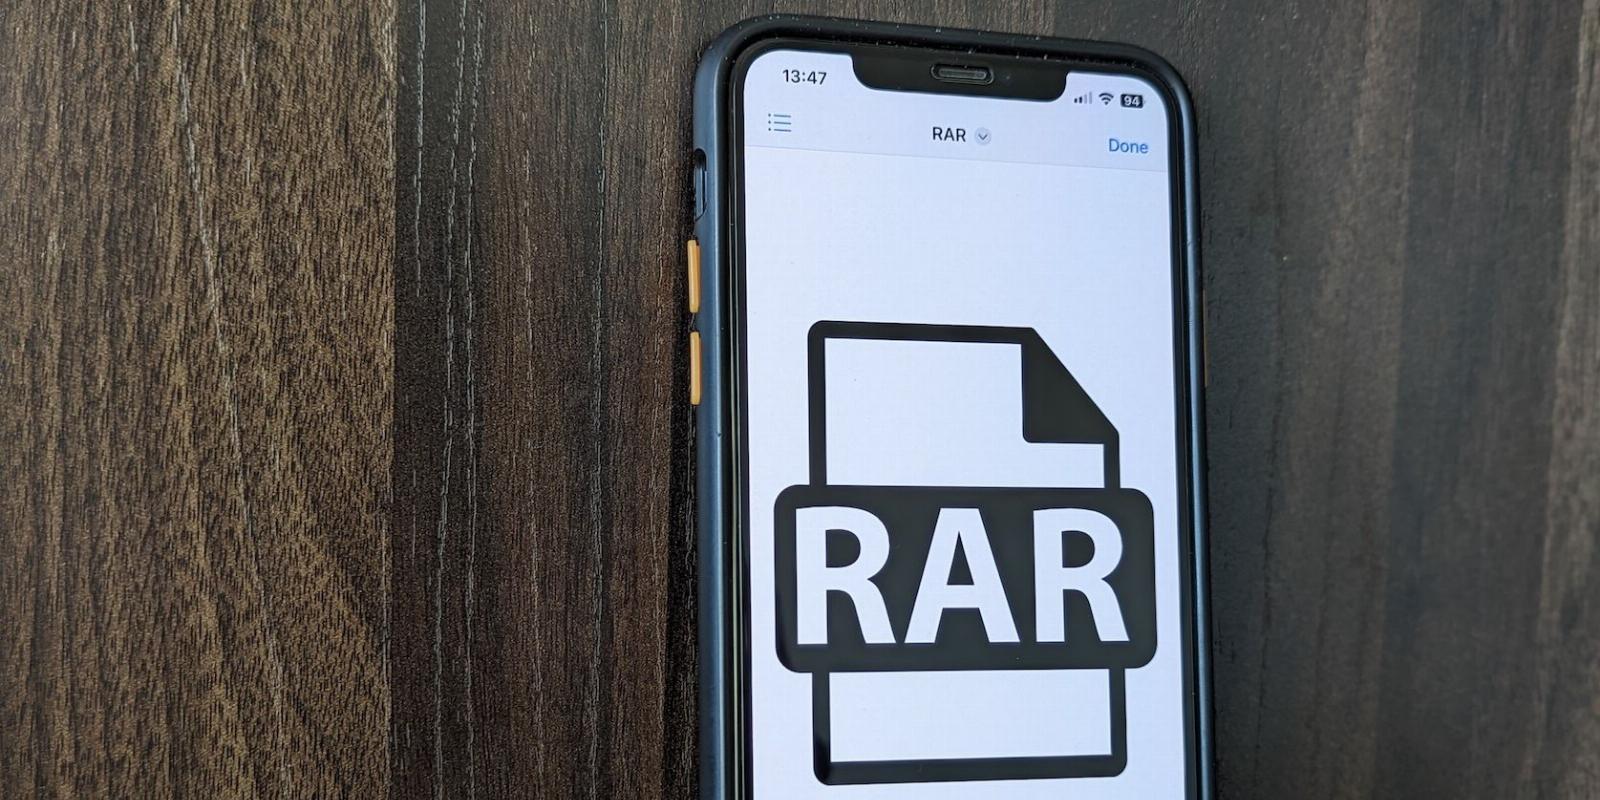 How to Open RAR Files on an iPhone